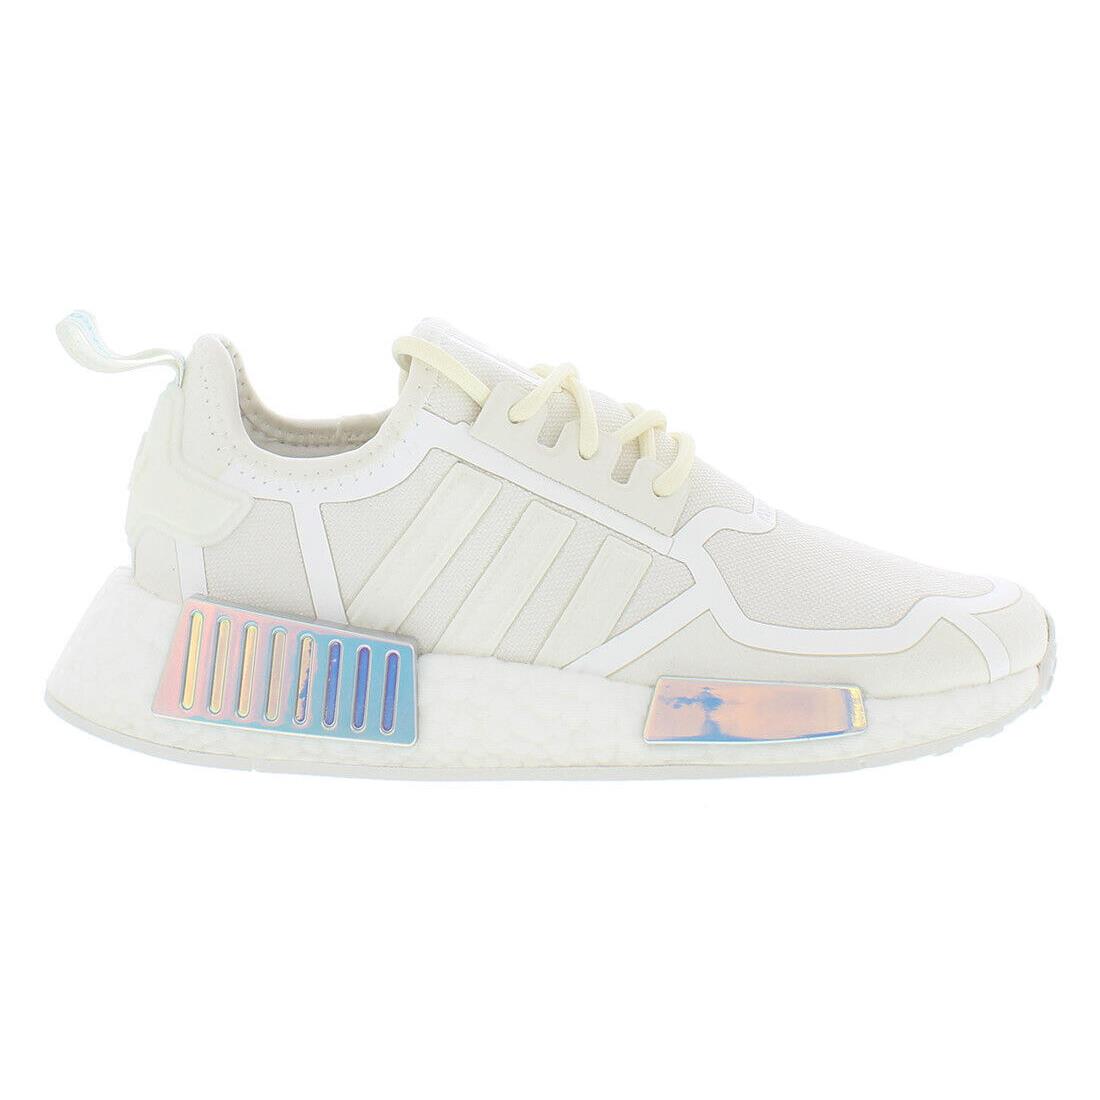 Adidas Nmd R1 GS Girls Shoes - White/Light Pink, Main: White